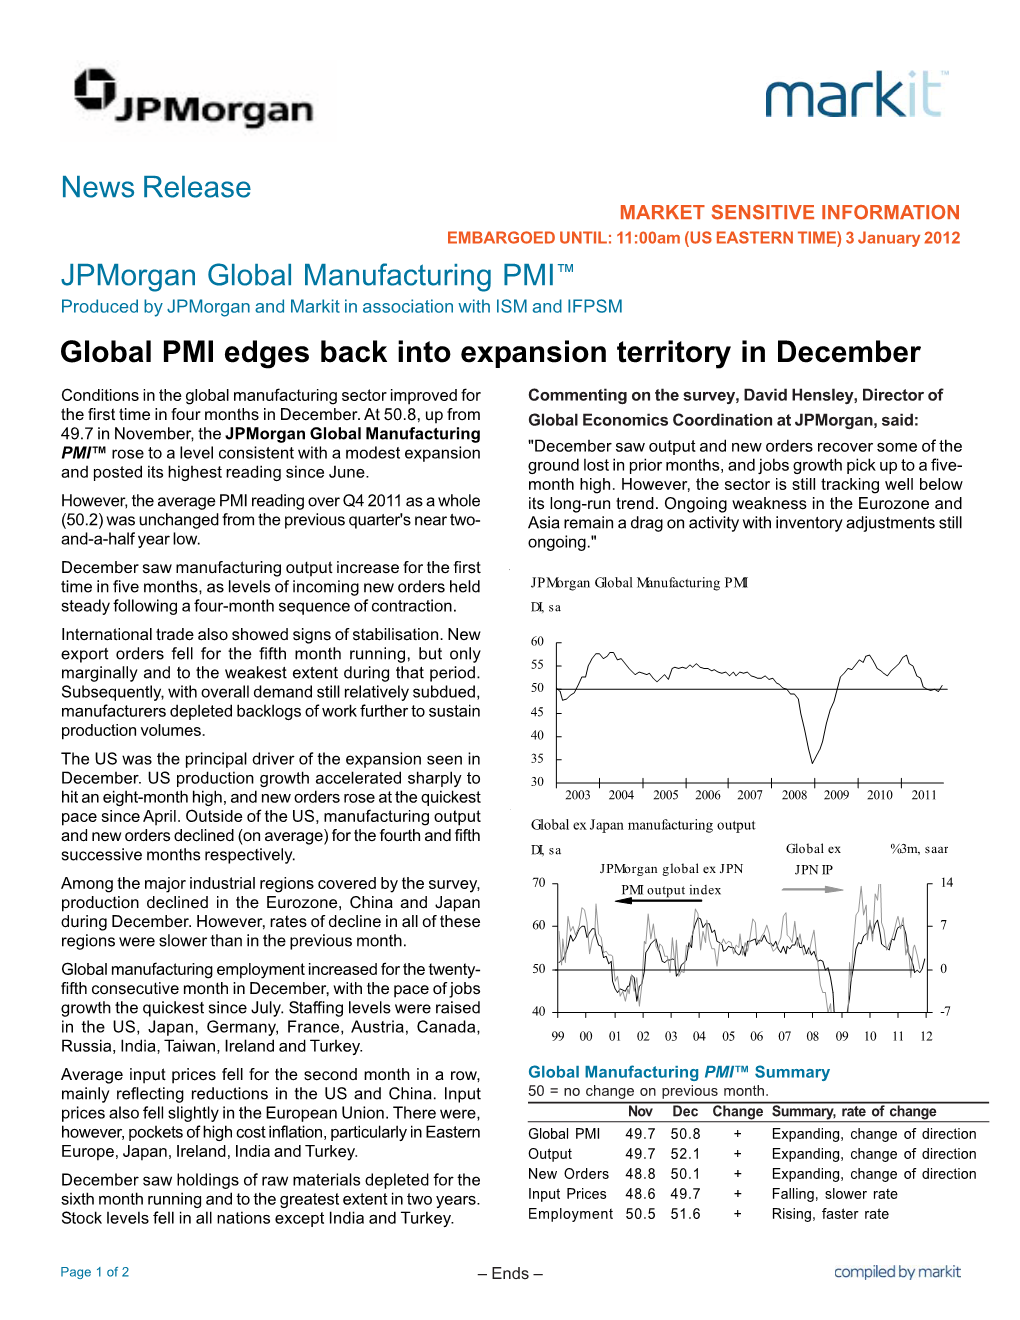 Global PMI Edges Back Into Expansion Territory in December News